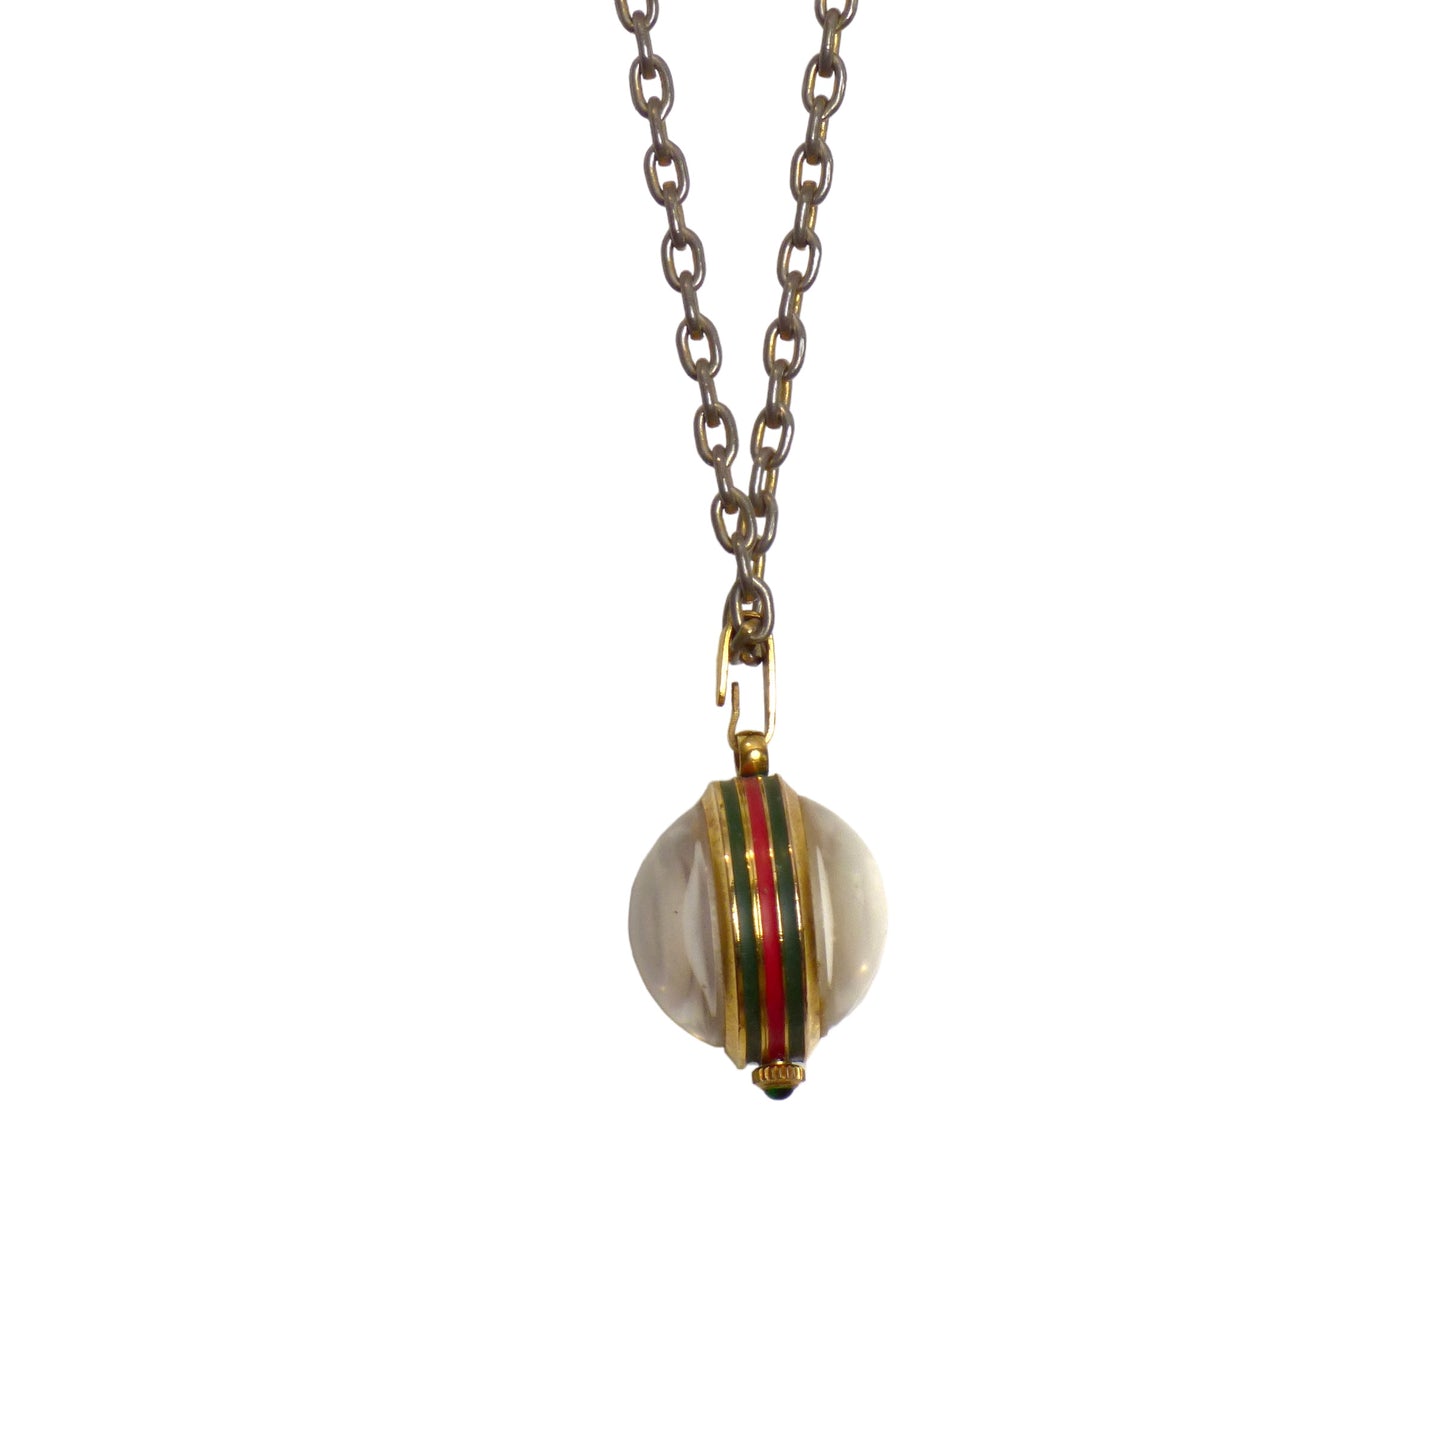 GUCCI- Orb Compact Analog Watch Necklace